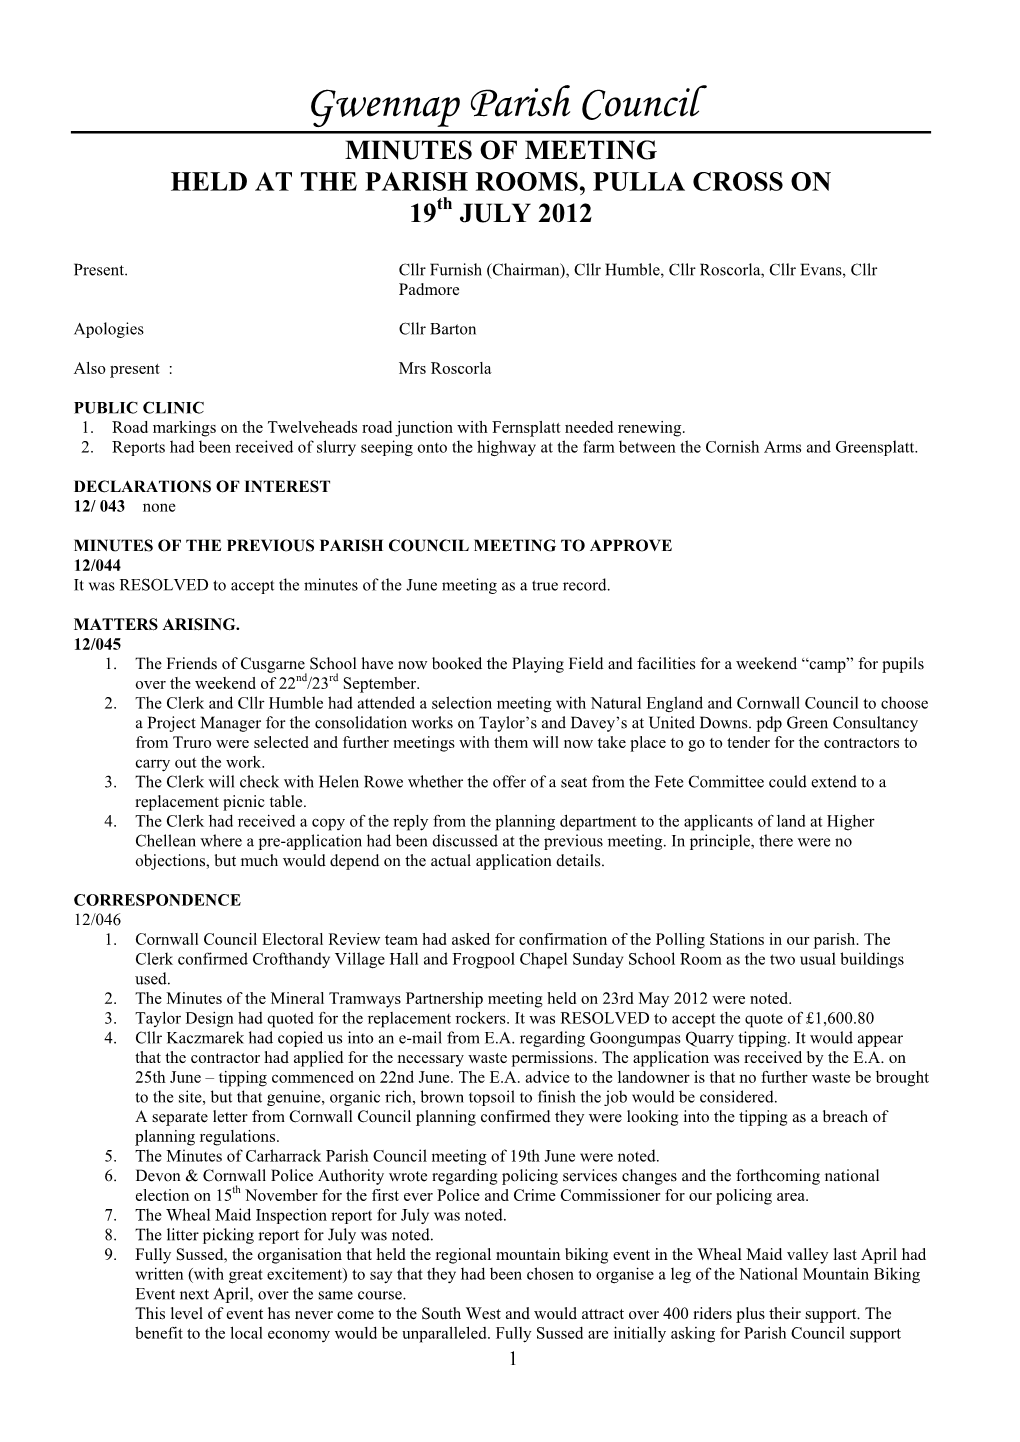 Gwennap Parish Council MINUTES of MEETING HELD at the PARISH ROOMS, PULLA CROSS on 19Th JULY 2012